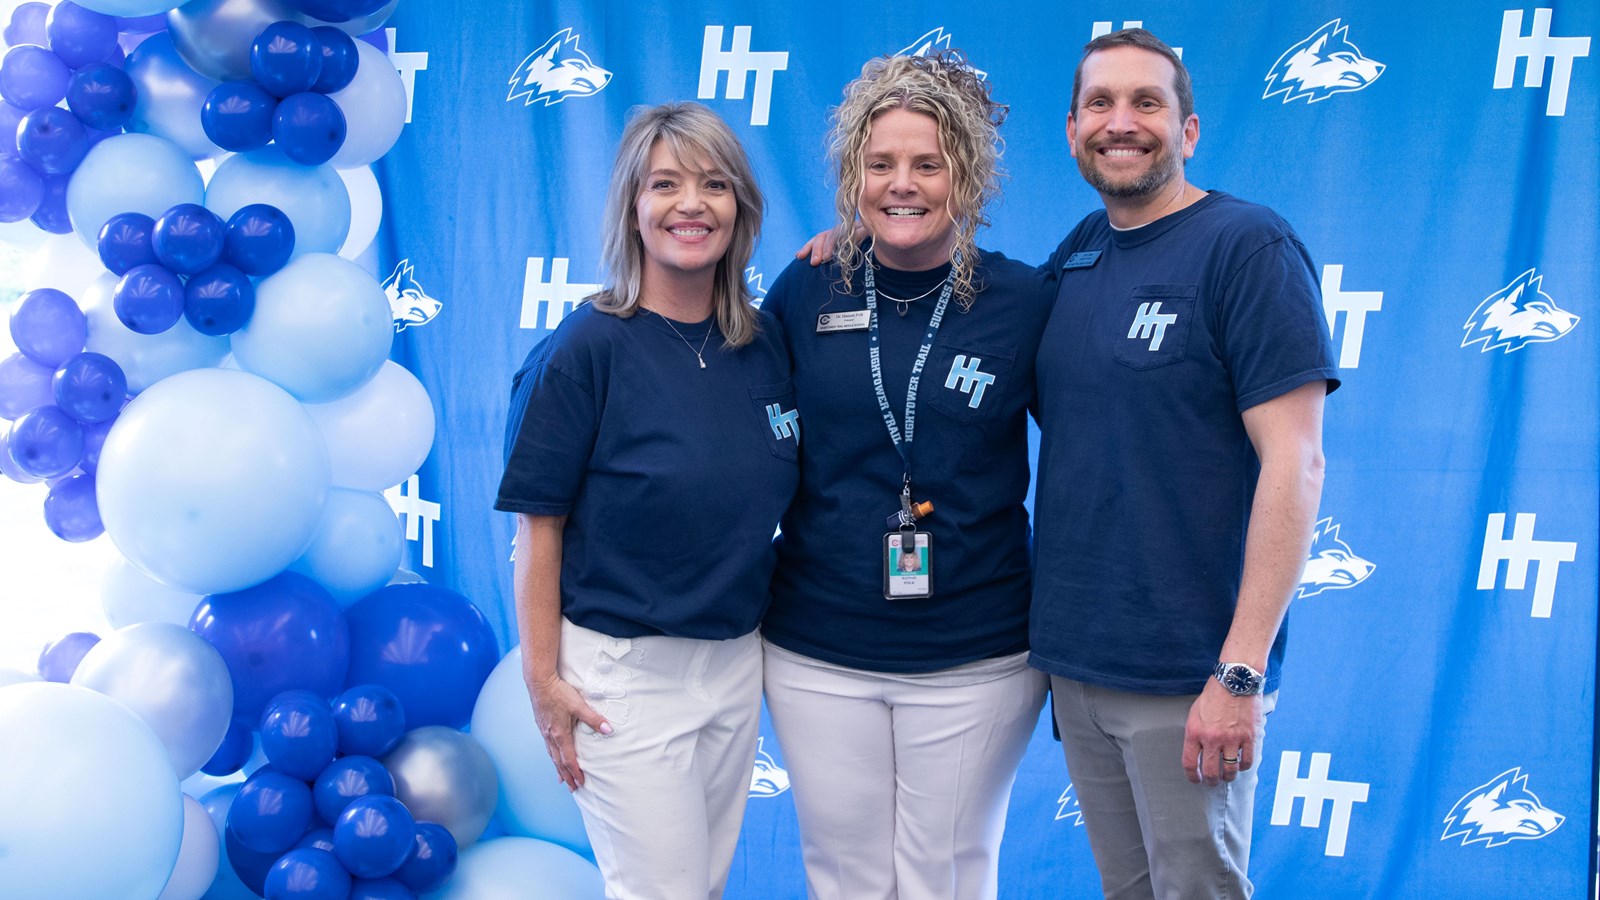 Hightower Trail Middle School celebrates 30 years of excellence.